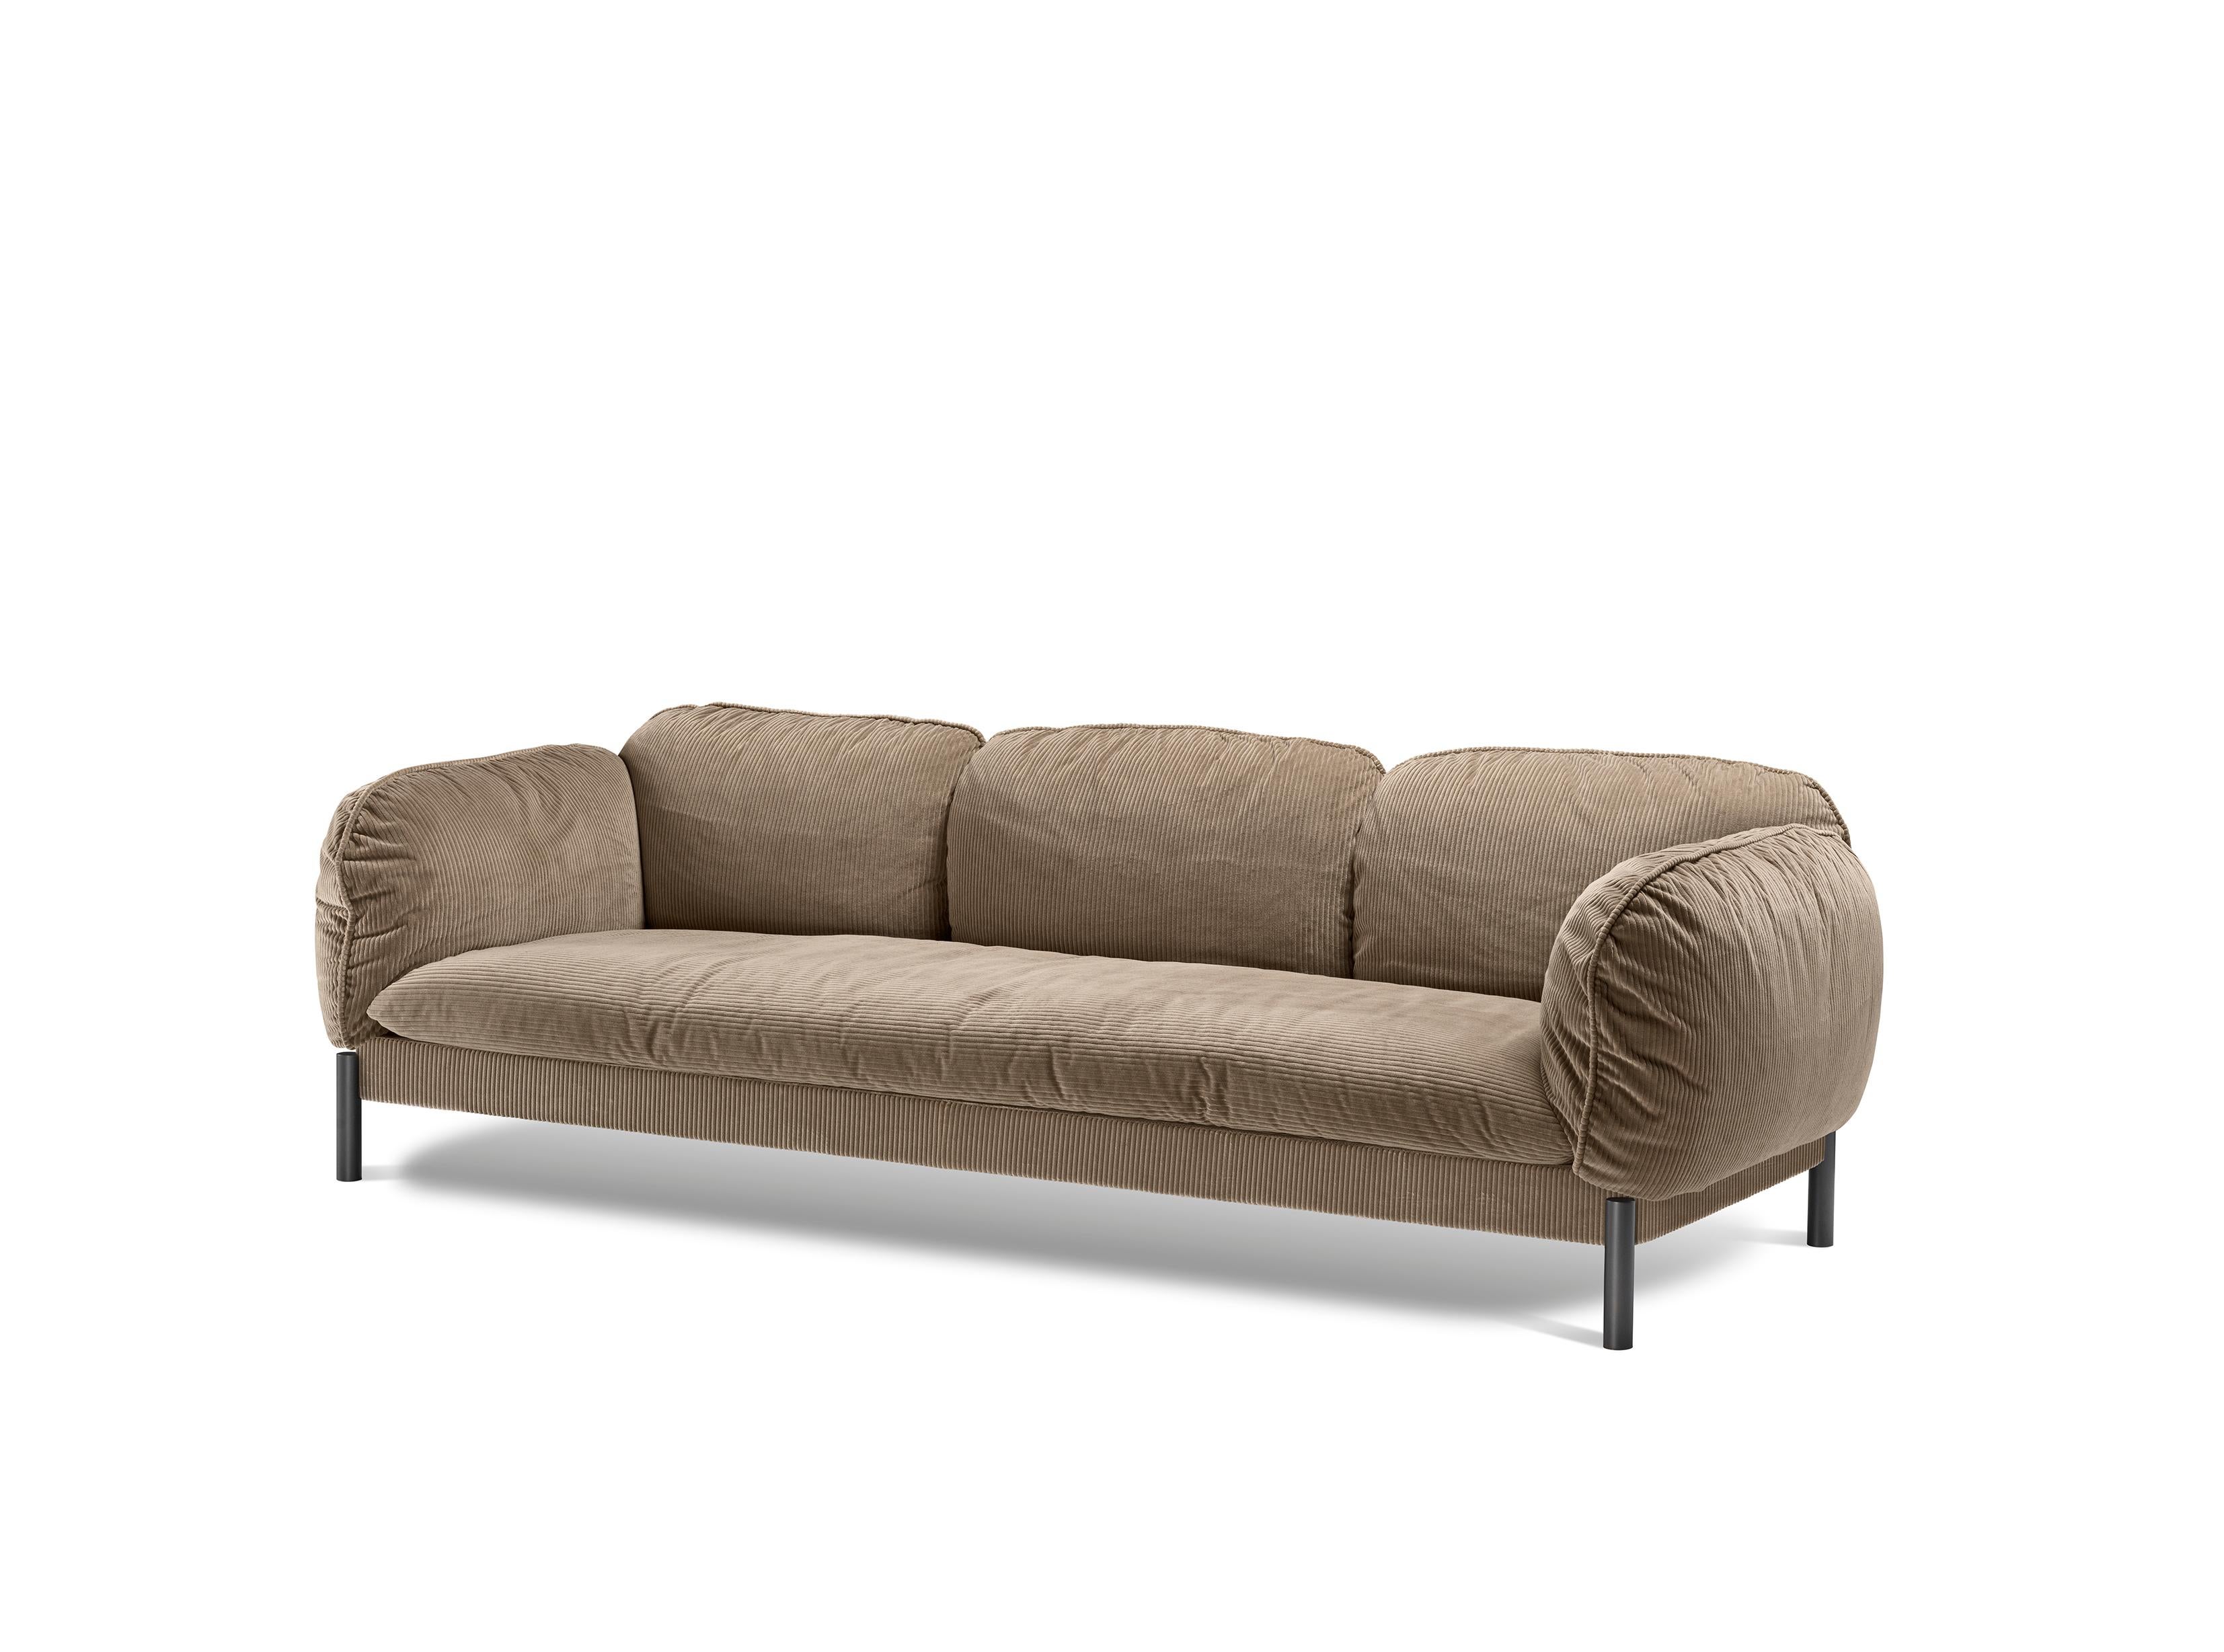 Soft and welcoming, this sofa is inspired by the 1970s; a decade that changed our culture forever through freedom and self-discovery. The sofa invites you to a world of fantasy where you can indulge in the comfort and coziness of your passions.